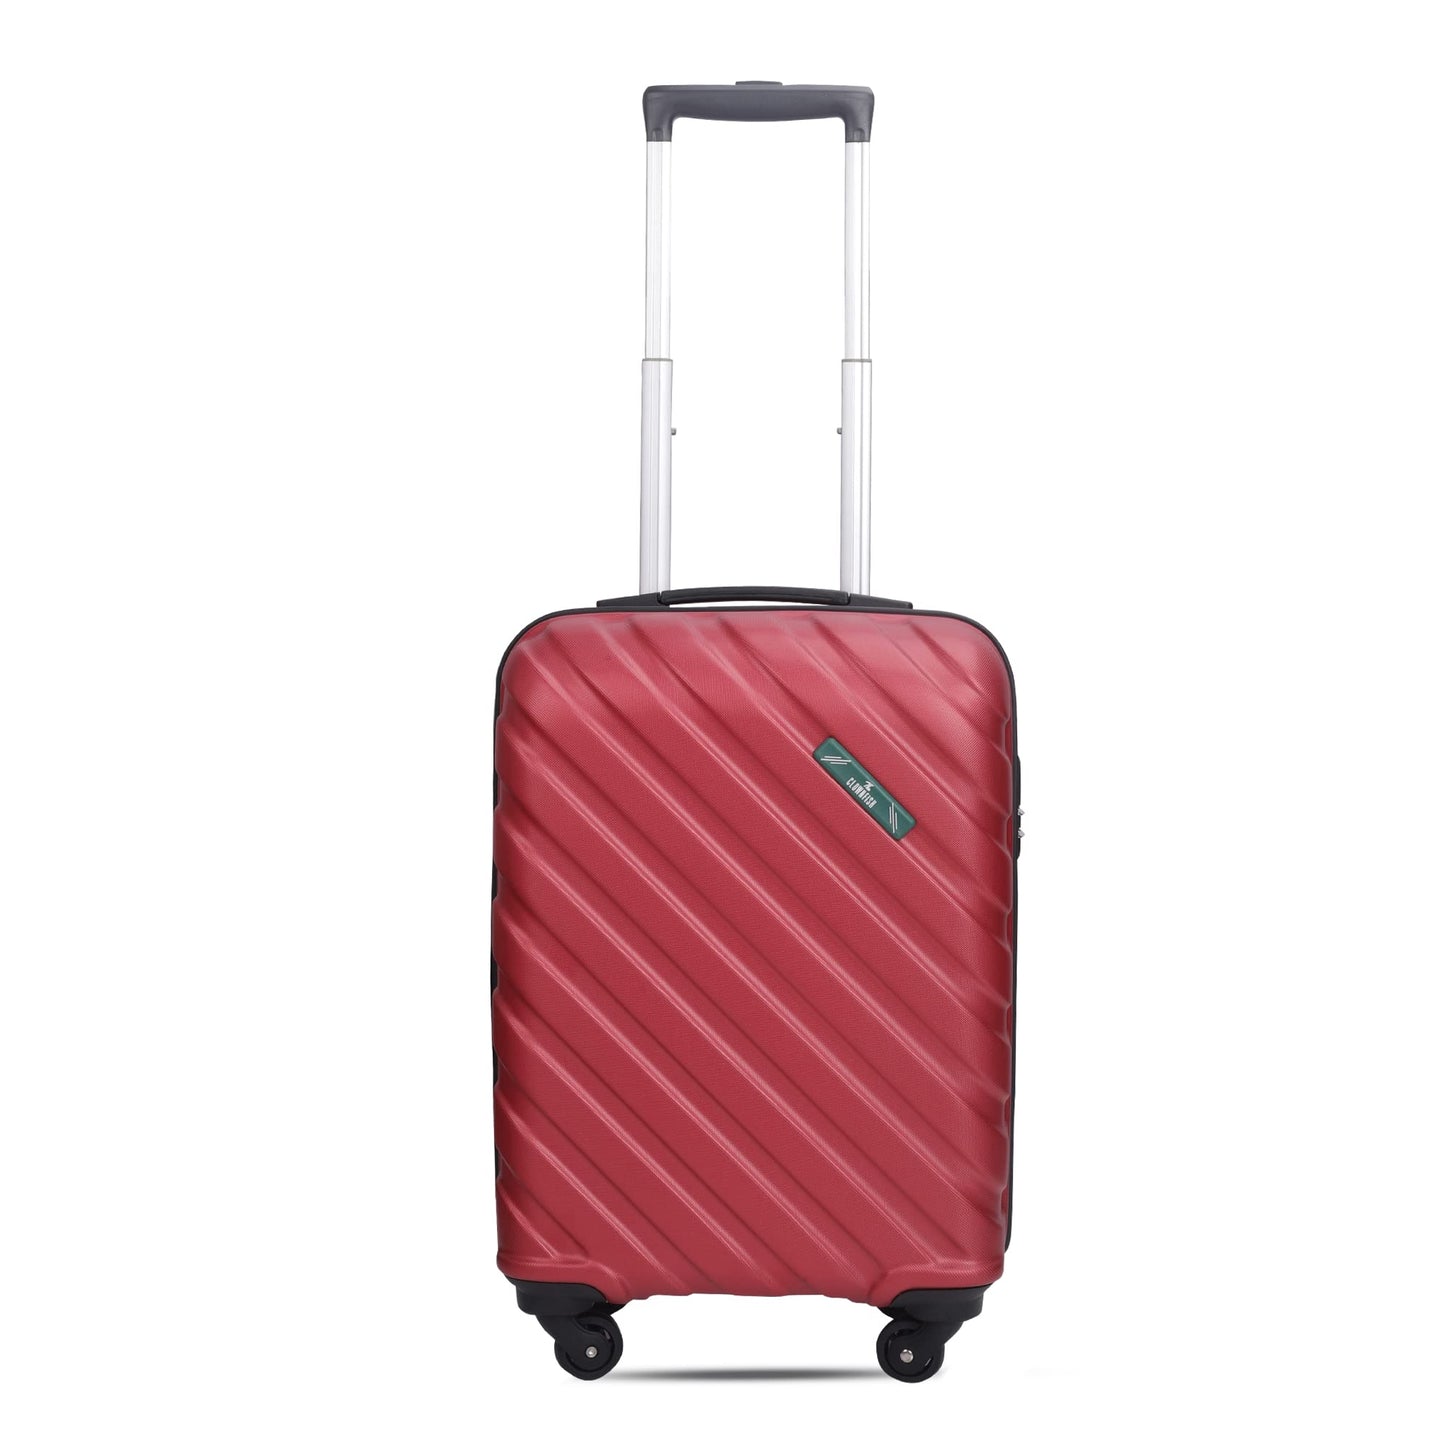 THE CLOWNFISH Armstrong Luggage ABS Hard Case Suitcase Four Wheel Trolley Bag- Red (Small size,54 cm-20 inch)